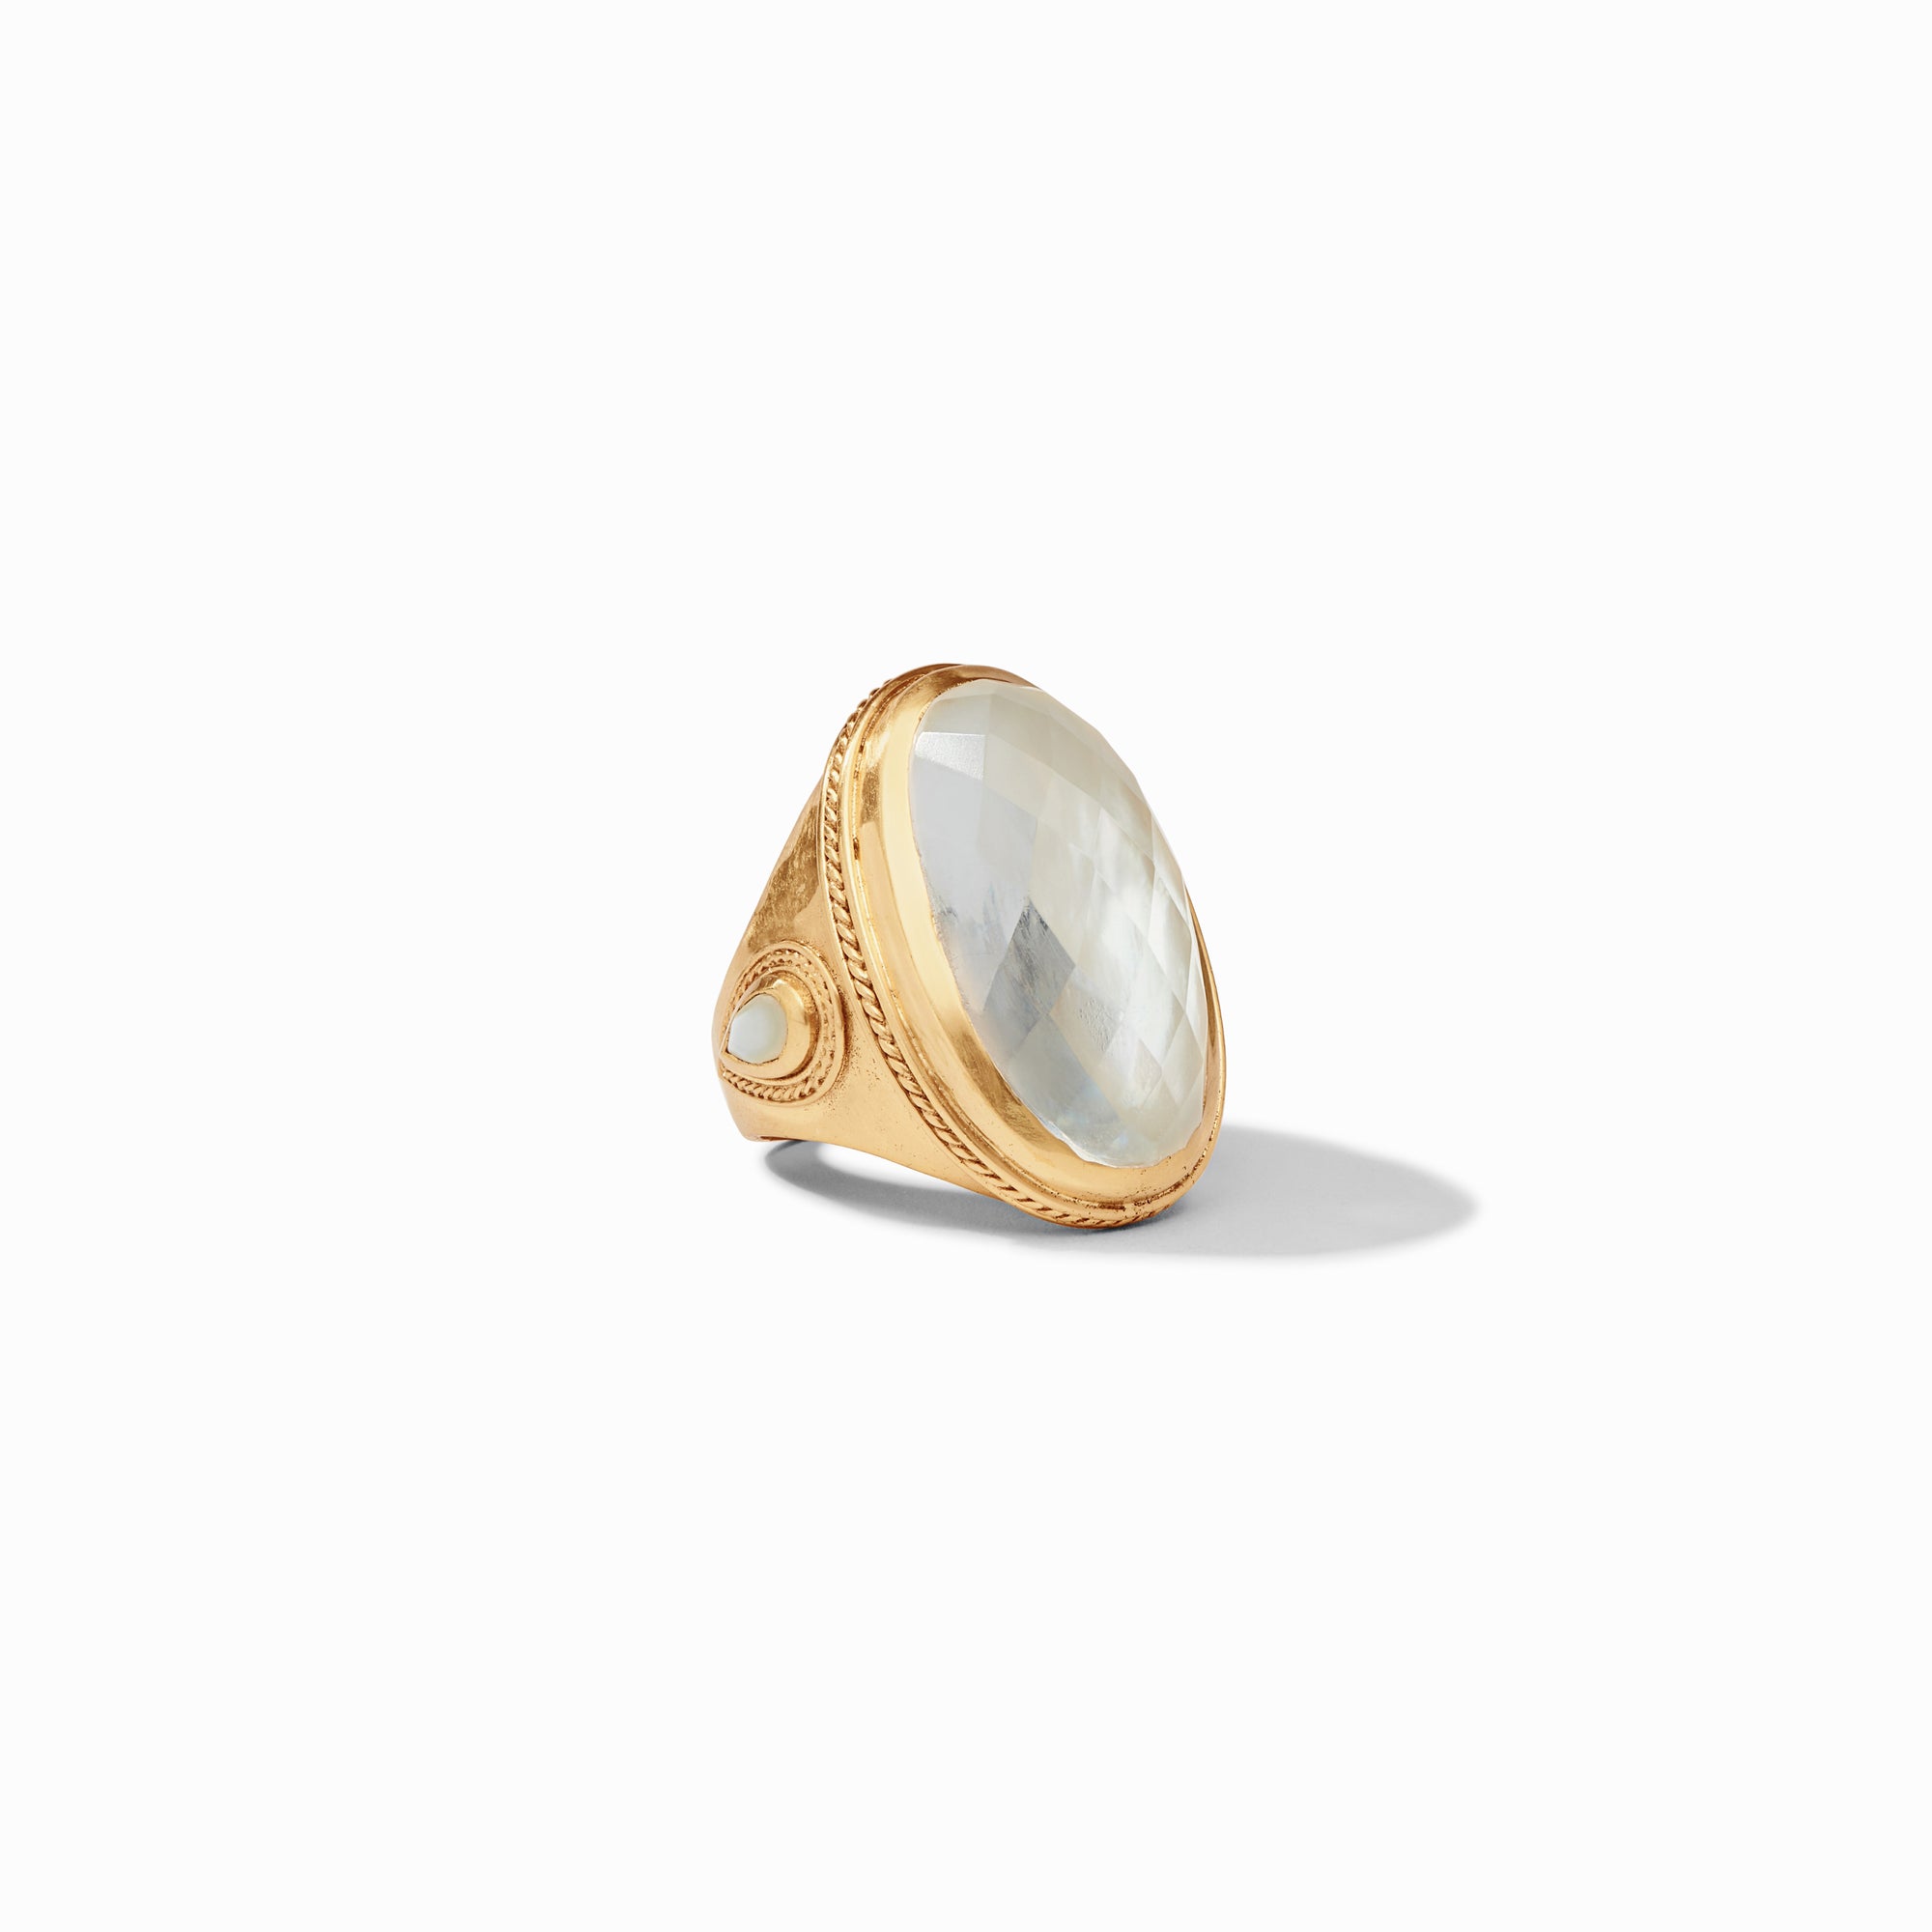 Julie Vos - Cassis Statement Ring, Iridescent Clear Crystal / 8